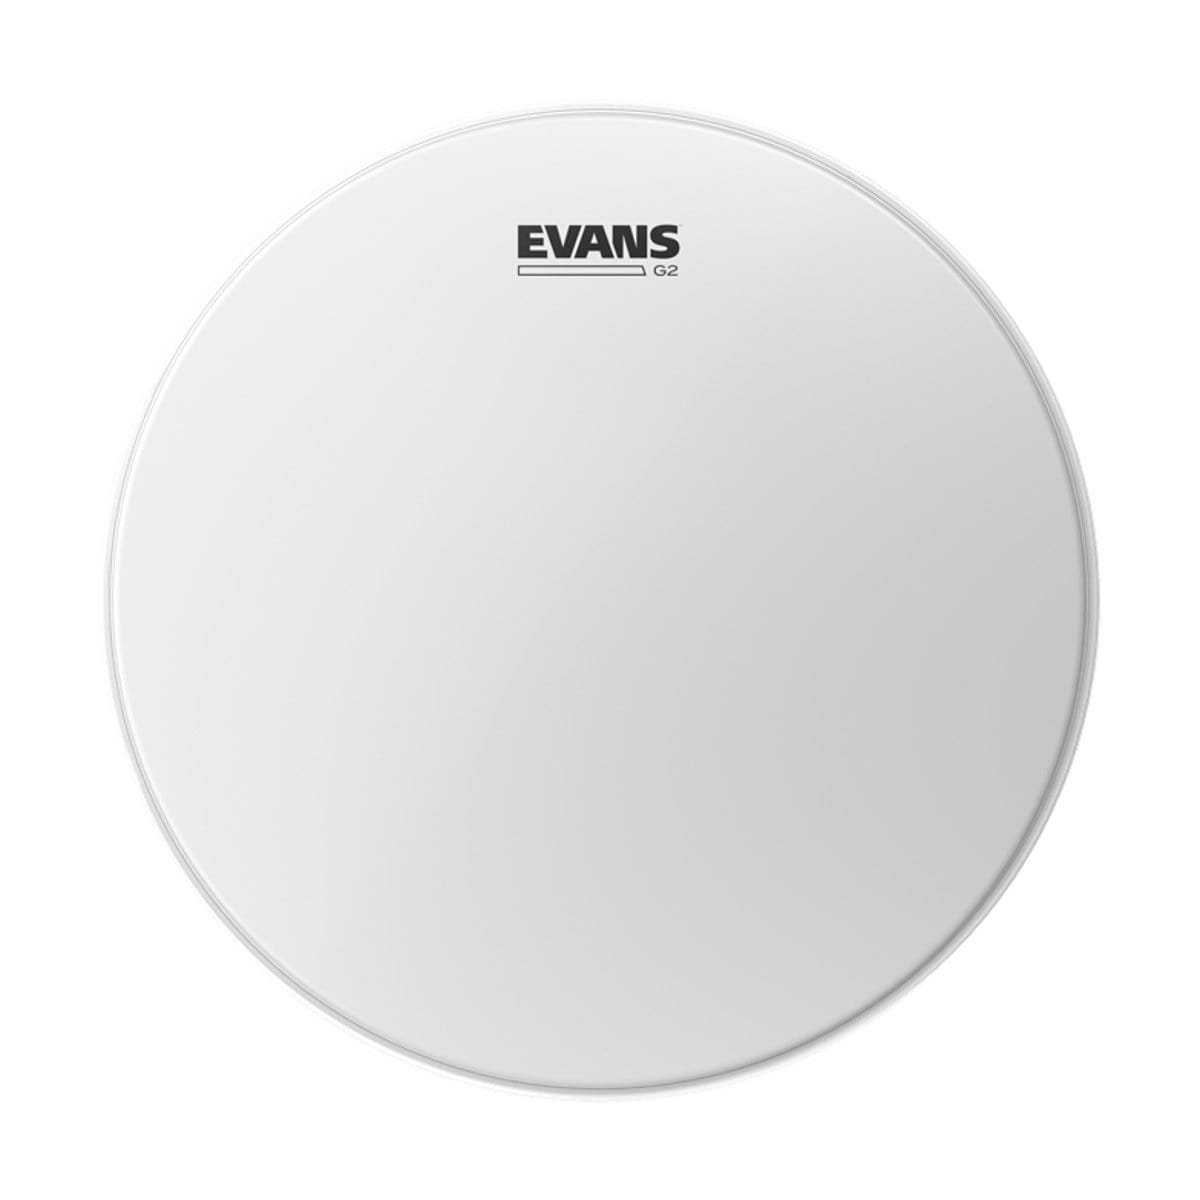 Evans Percussion Evans 13 Inch Drum Head G2 Coated B13G2 - Byron Music